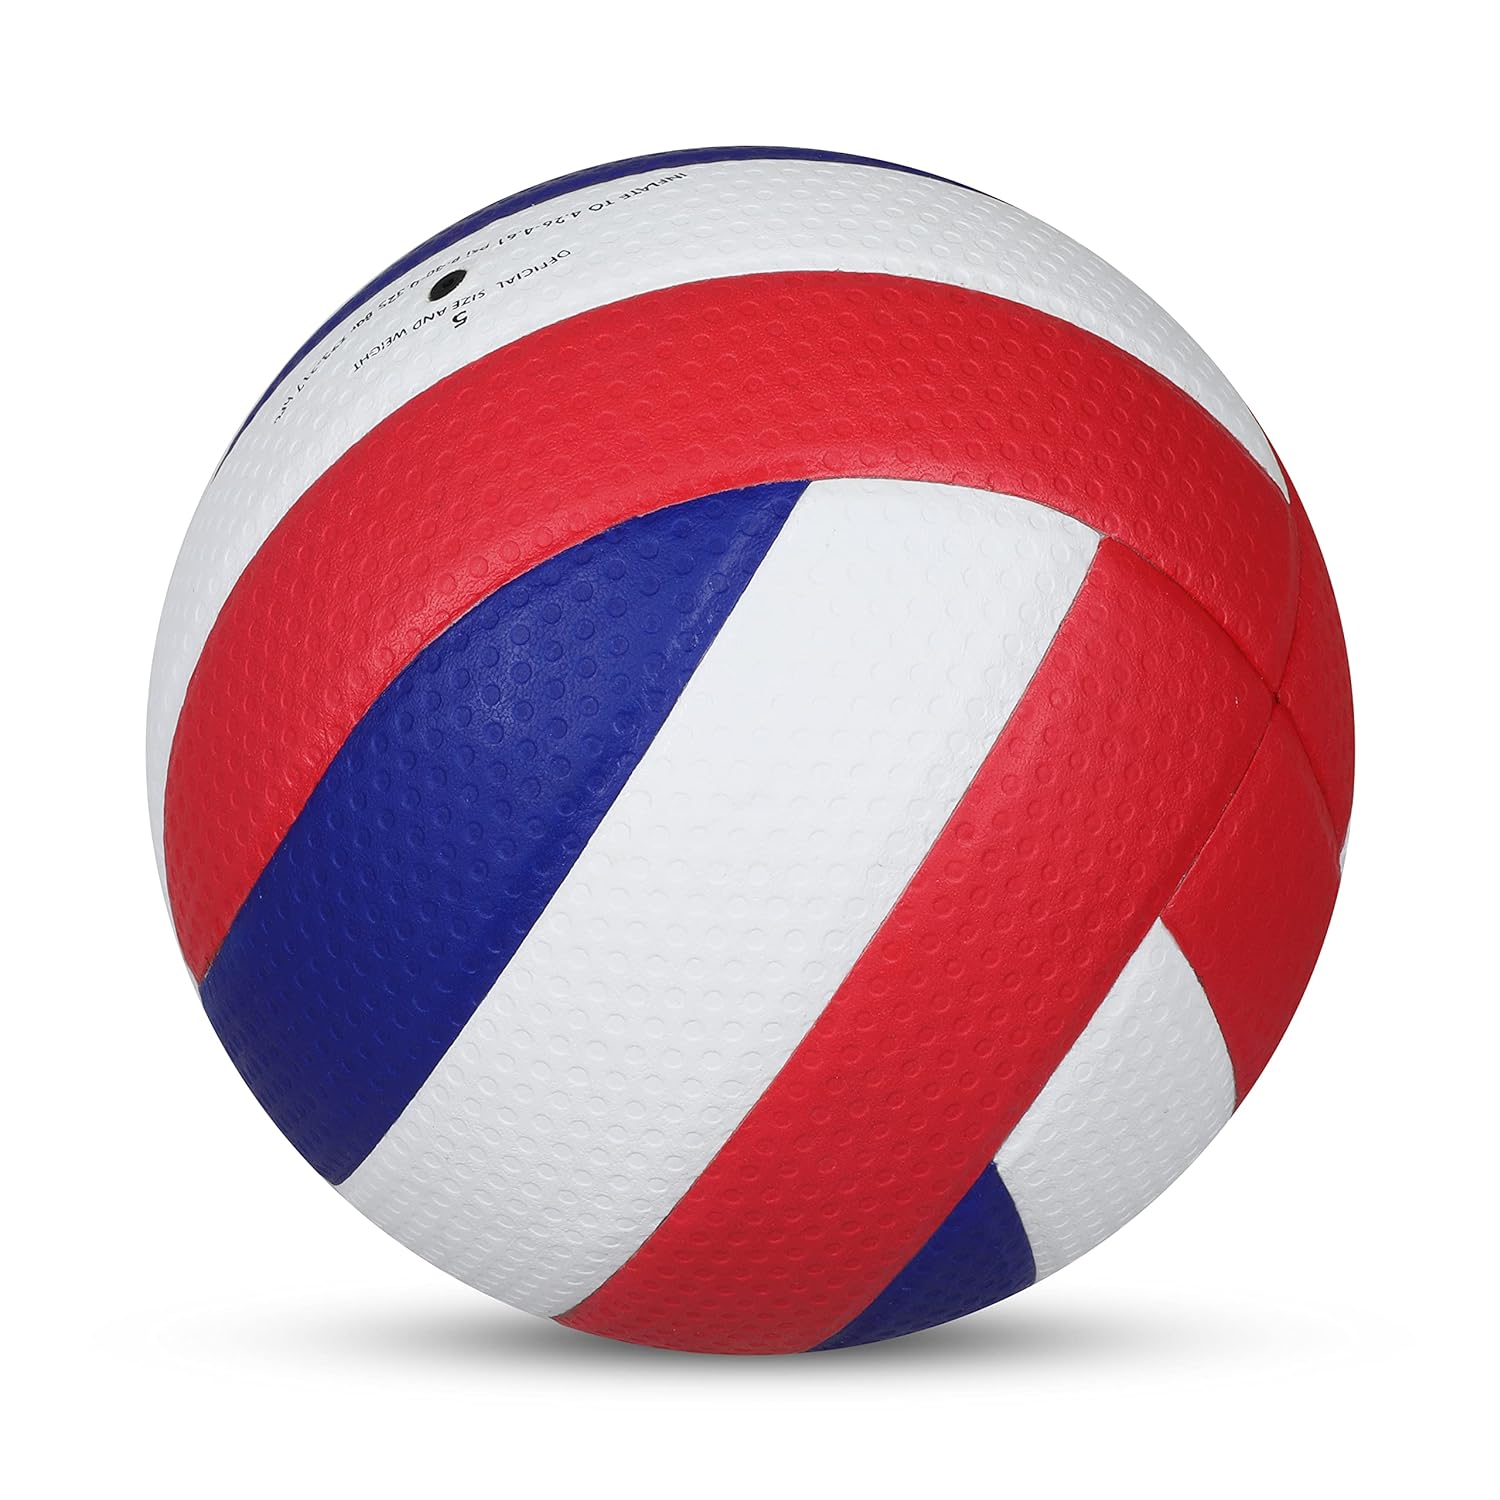 Nivia Vayu Pasted Volleyball,Red/White/Blue -Size 4 - Best Price online Prokicksports.com